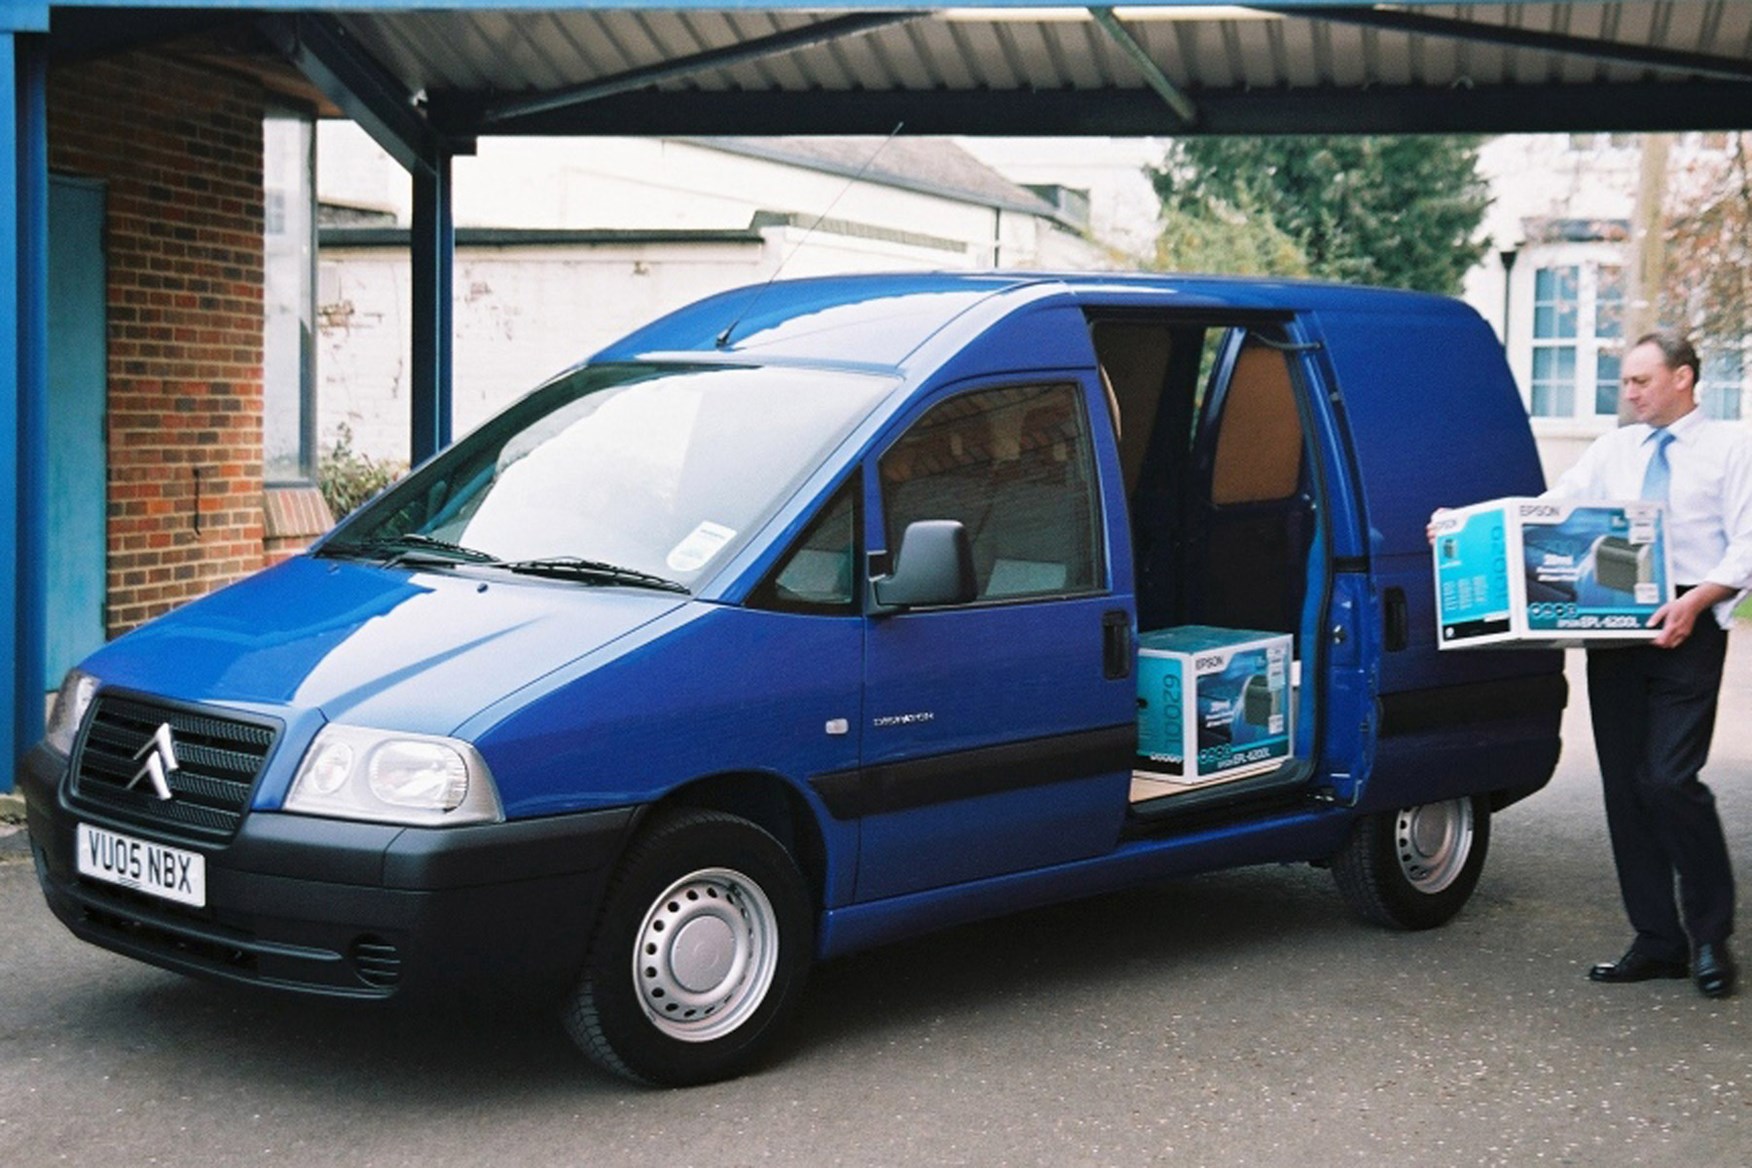 Citroen Dispatch on Parkers Vans - dimensions, load area and payload